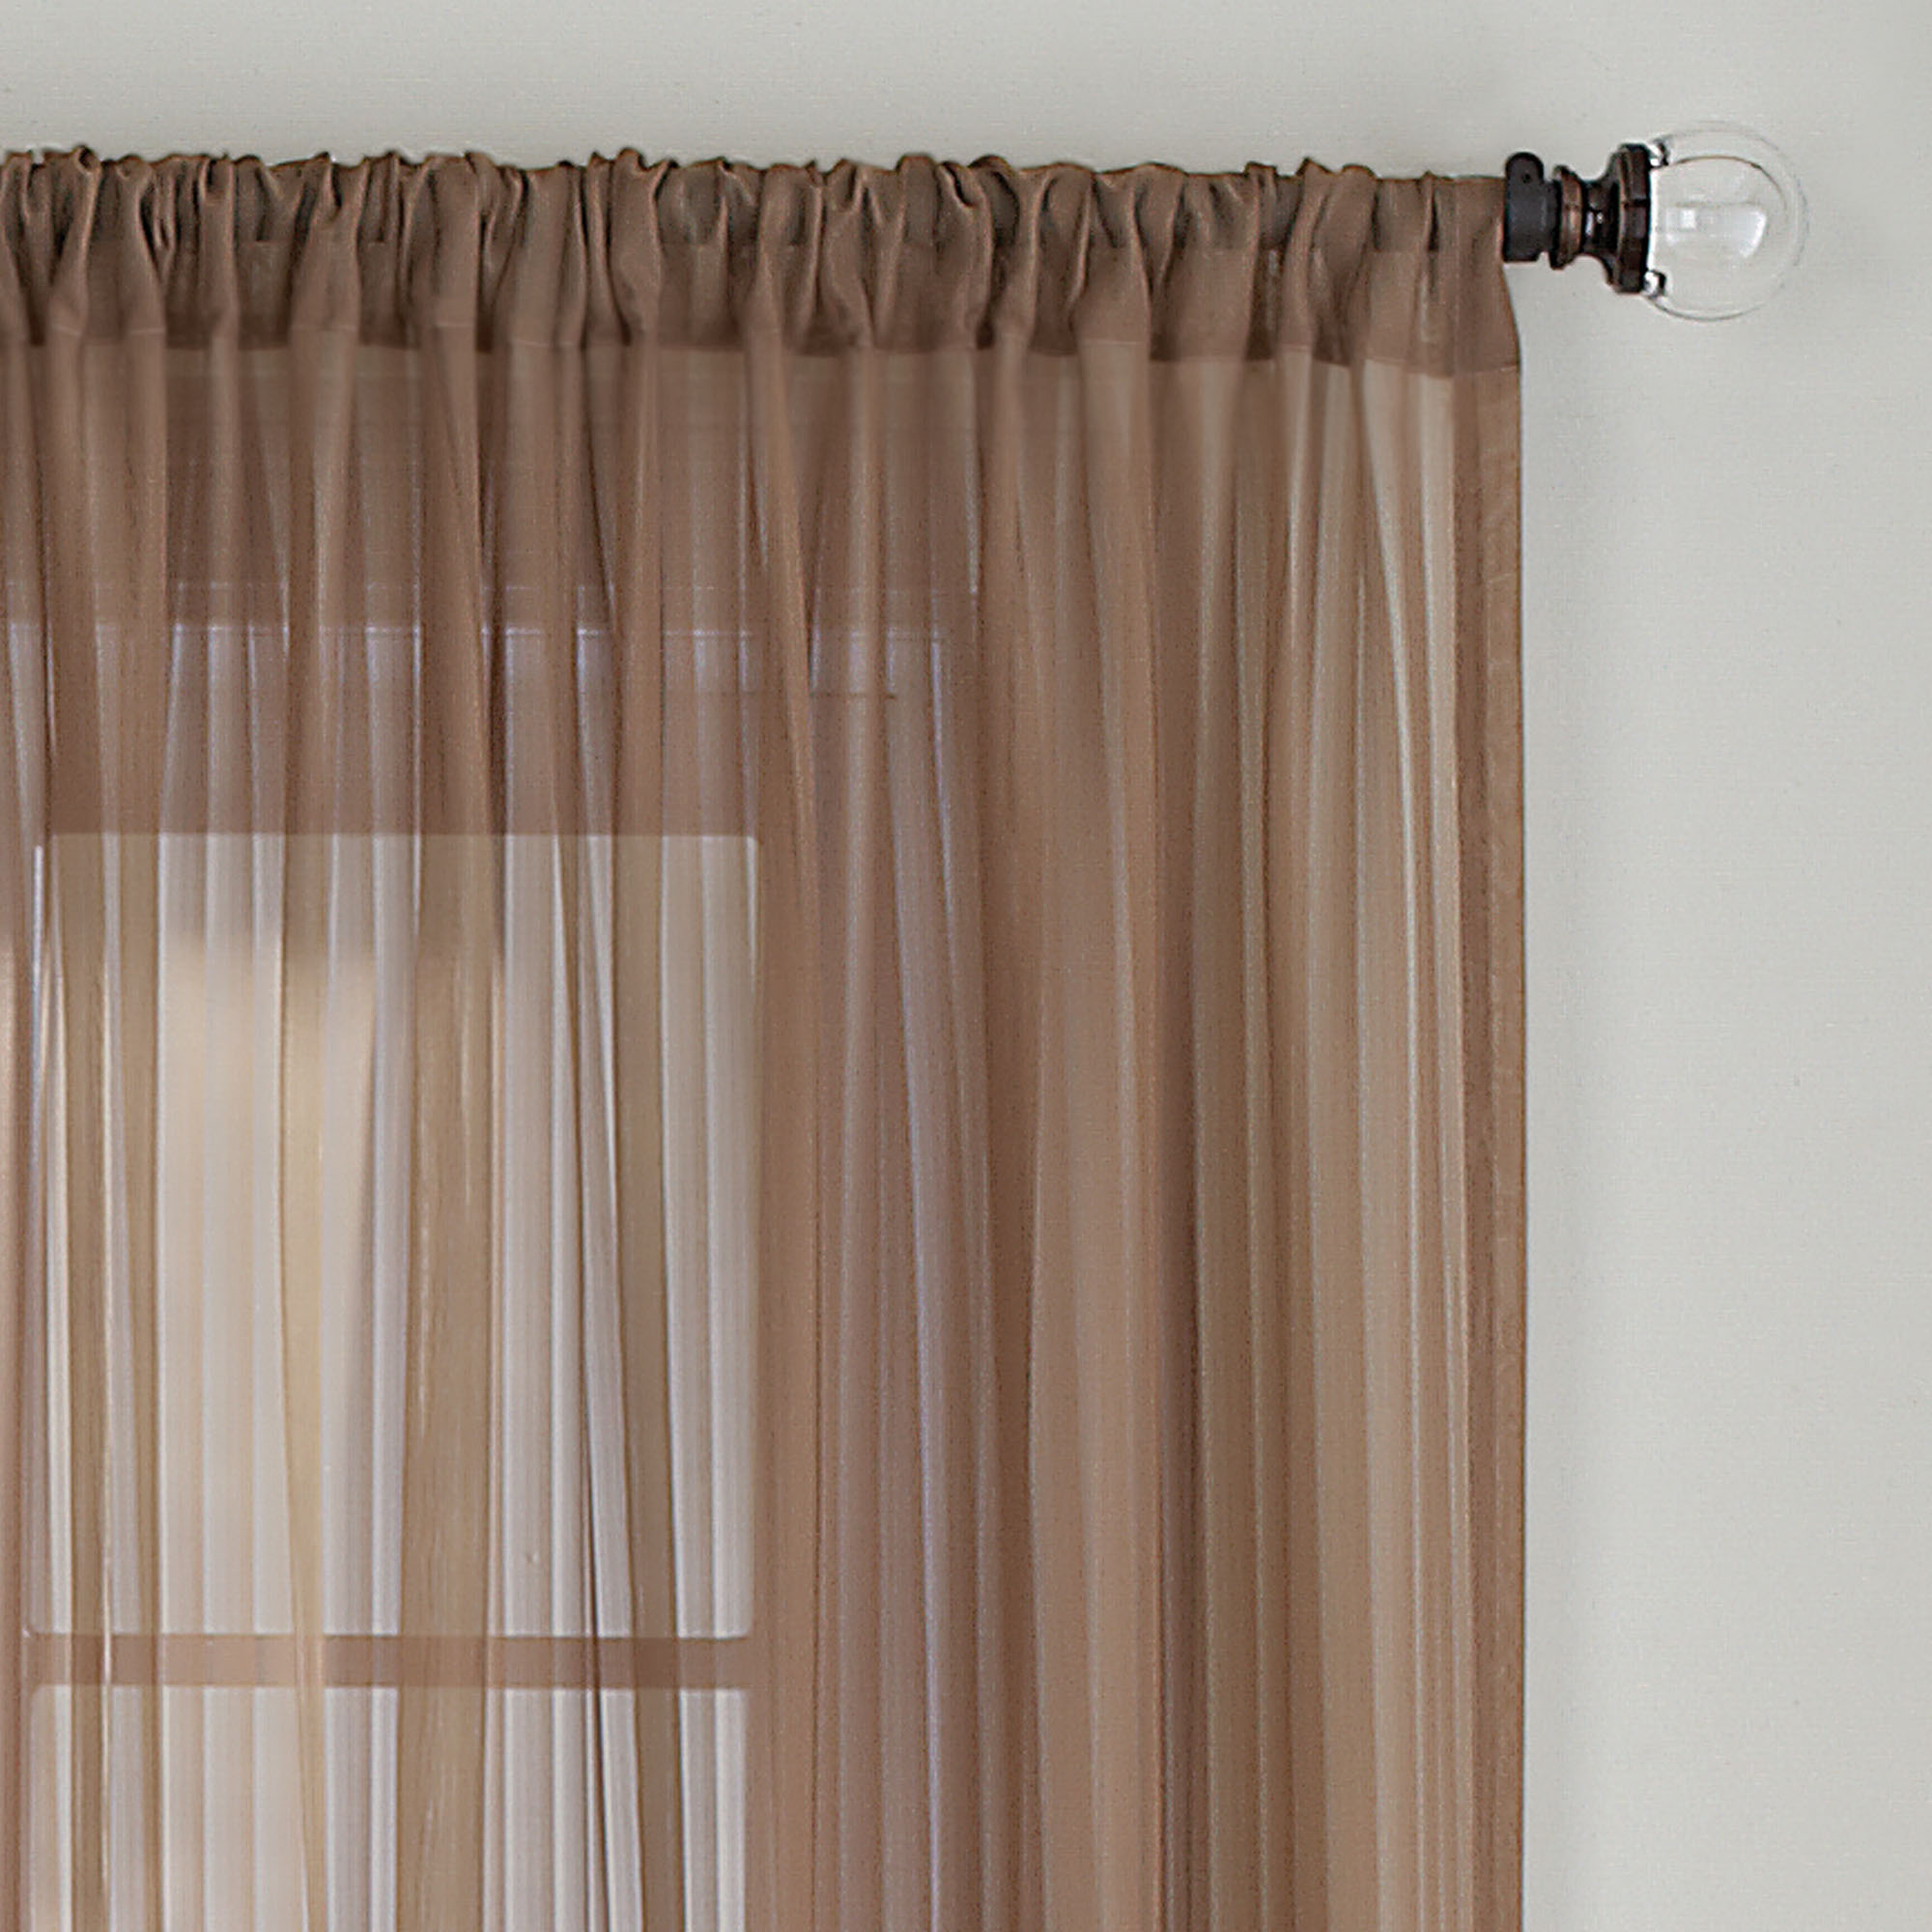 Better Homes & Gardens Vertical Stripe Rod Pocket Sheer Curtain Panel, 52" x 84", Beige/Clay - image 4 of 5